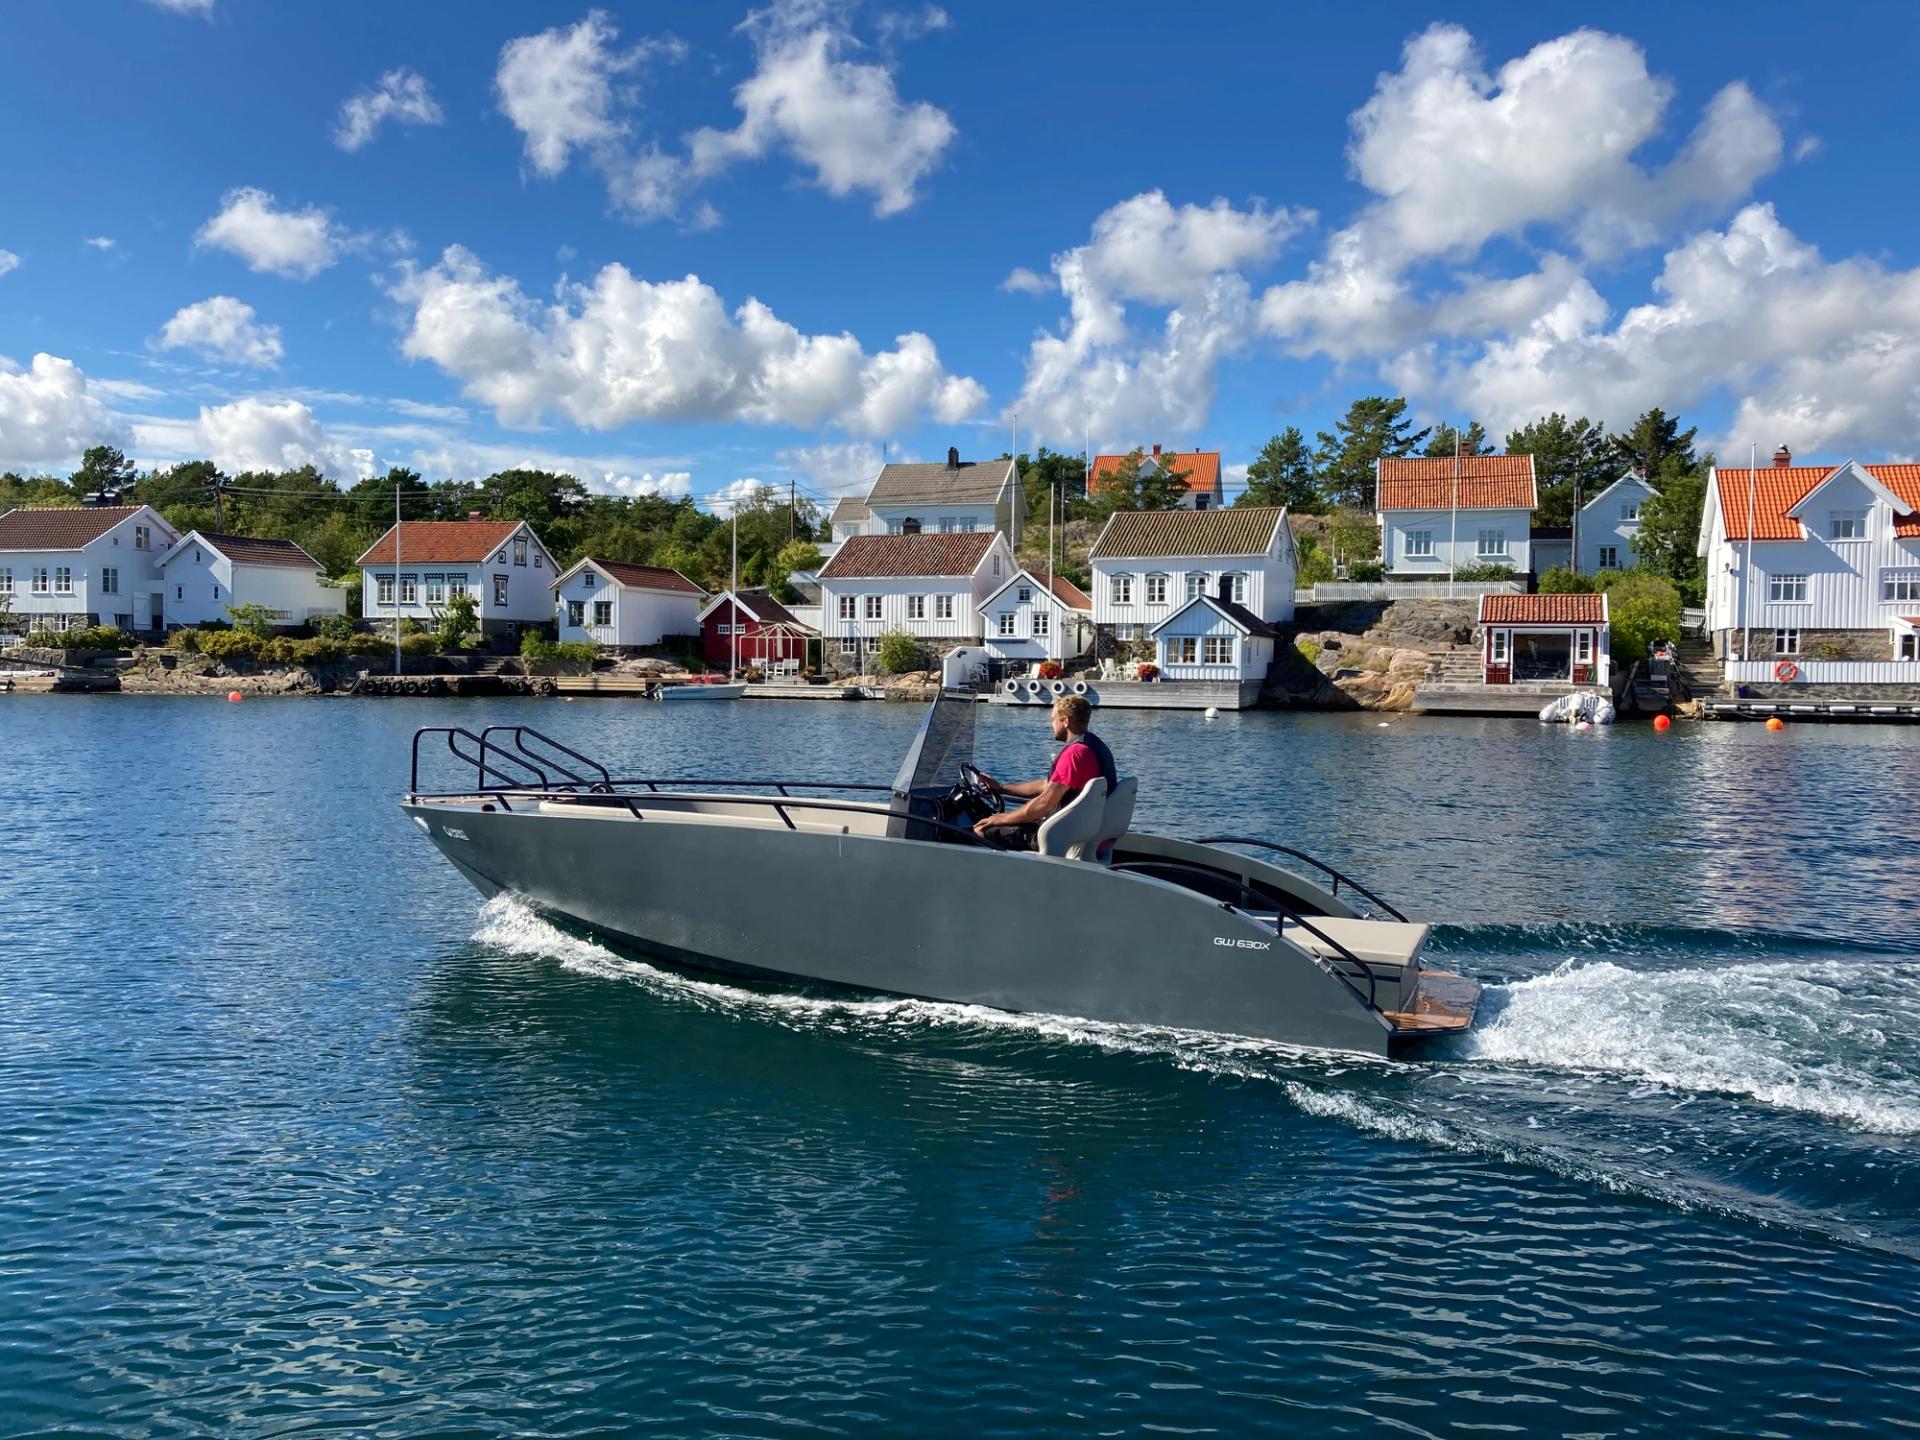 A small electric boat driving in front of old white houses